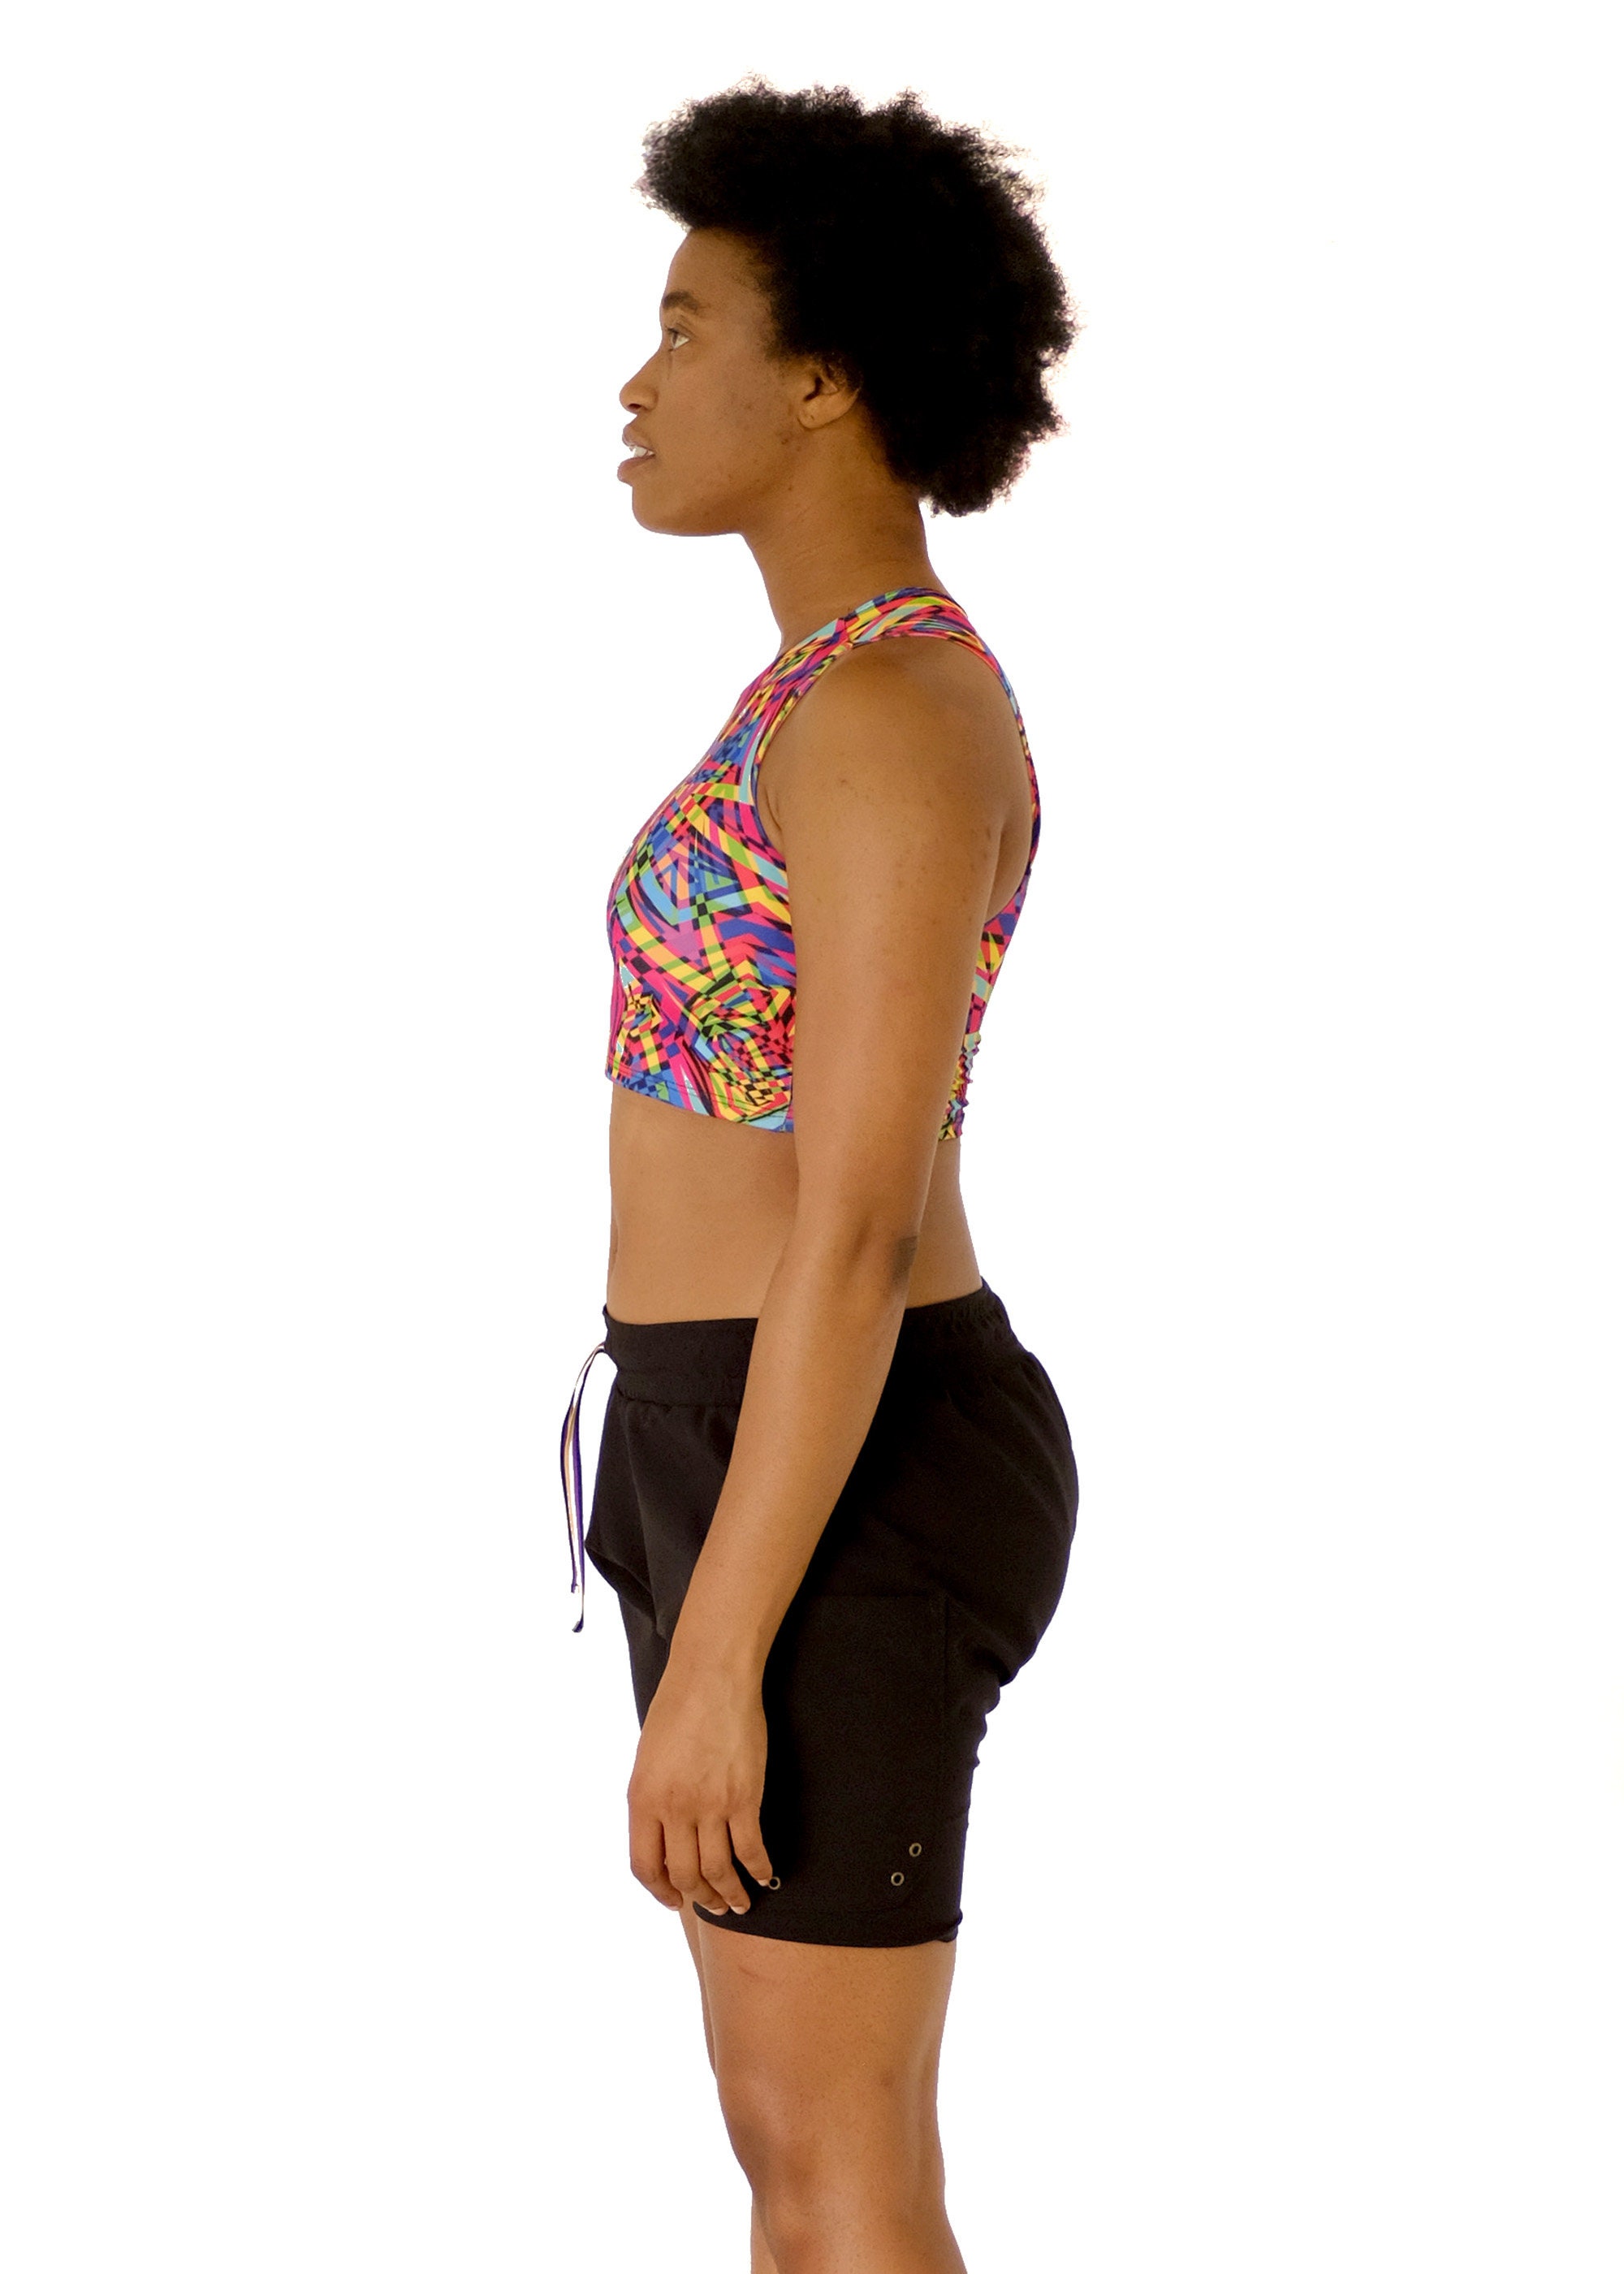 Active Top for Swim and Exercise Safe Compression 